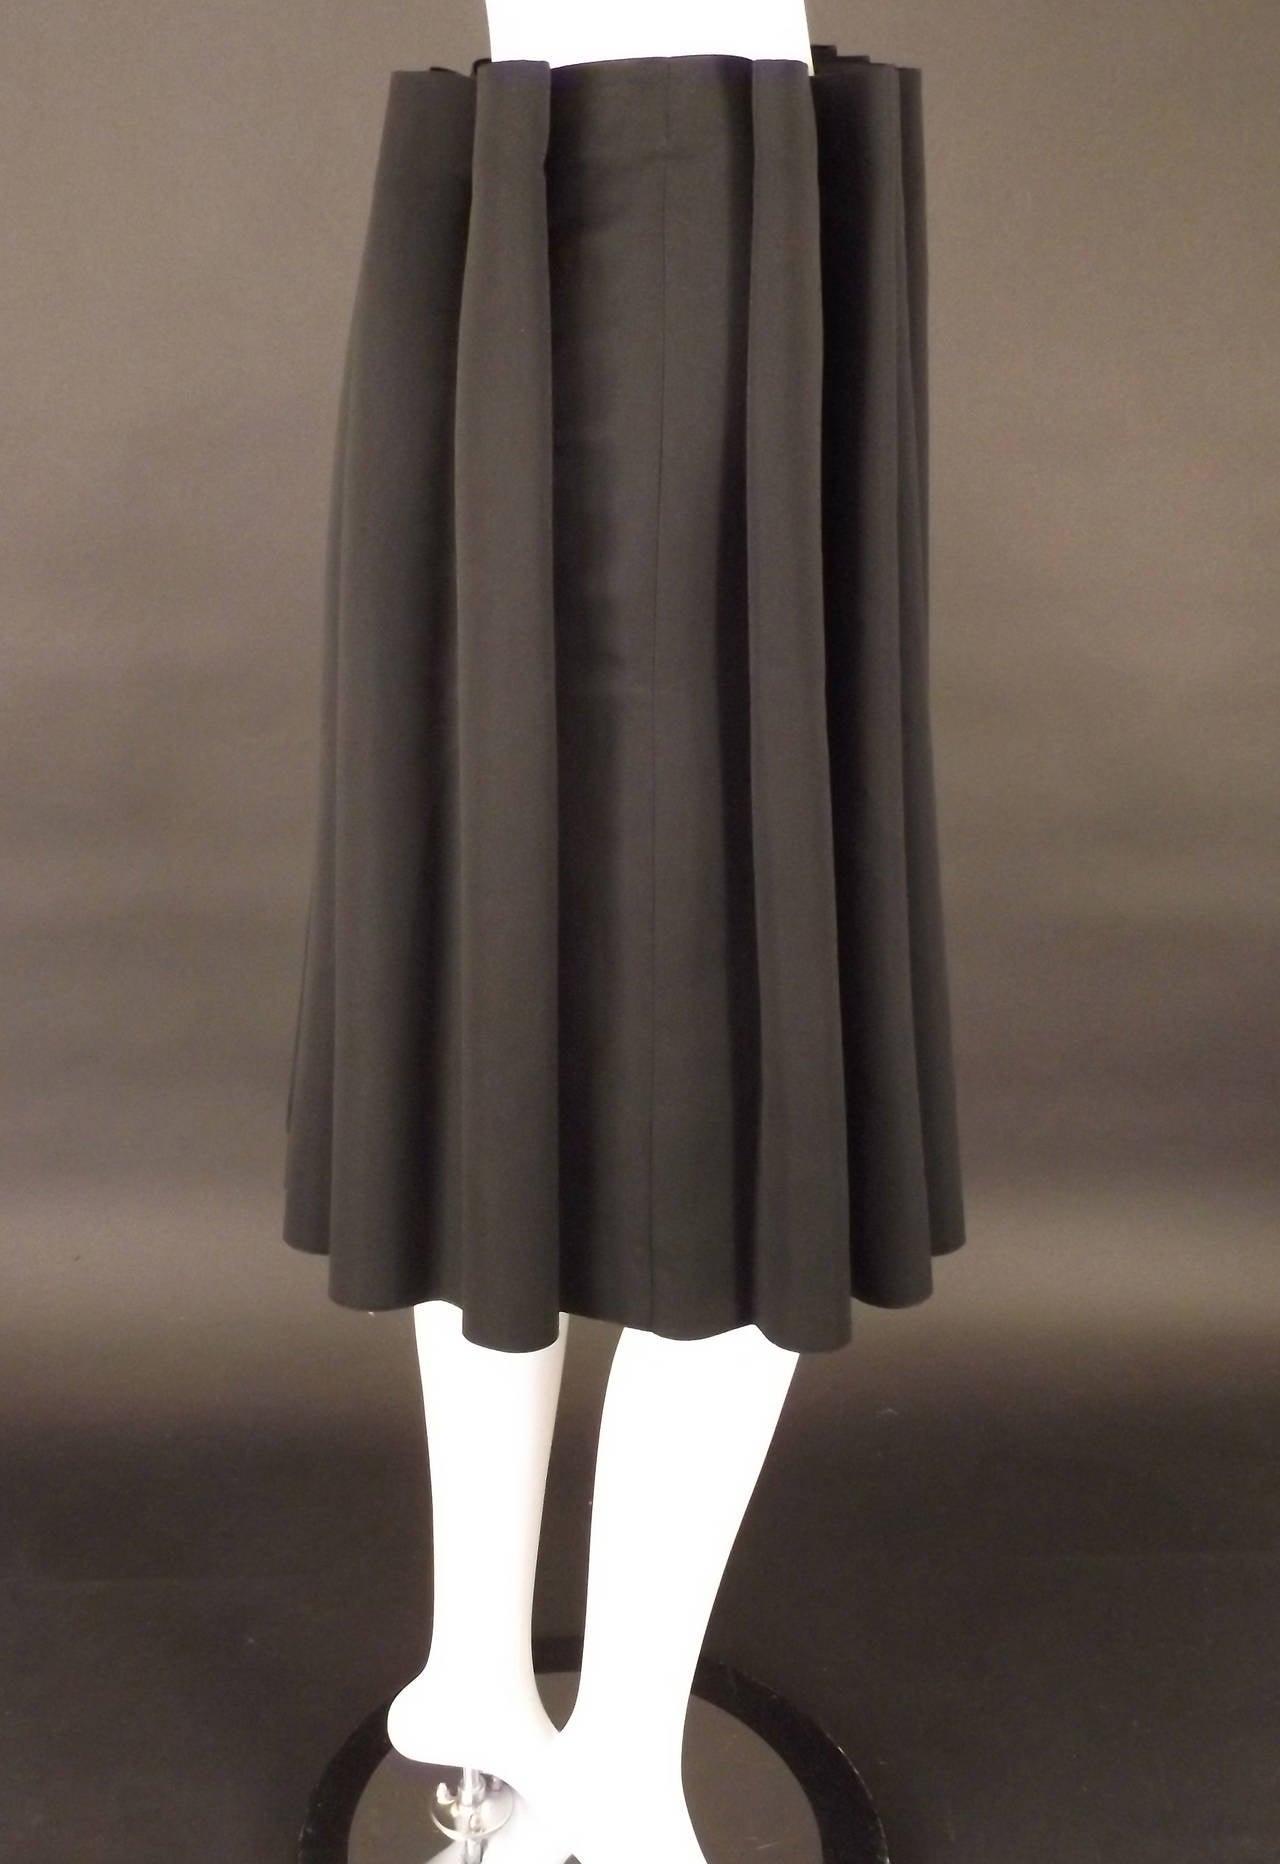 Amazing skirt in black polyester satin. The skirt has released, outward pointed tucks that are not flattened, but are rolled instead, creating coils. The coils open into the body of the skirt creating fullness. Side zipper closure and unlined.